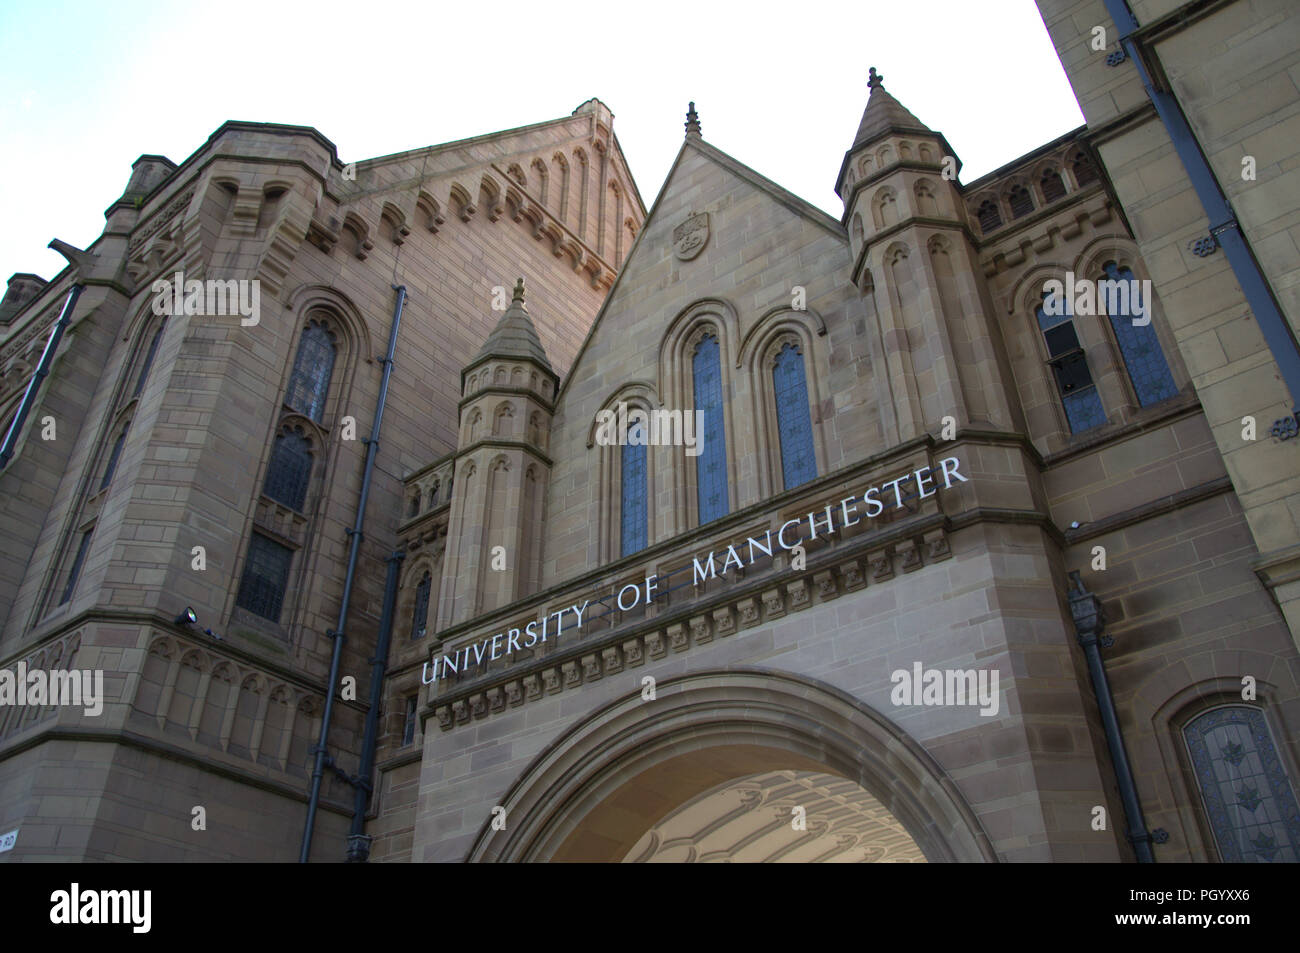 Whitworth Hall at the University of Manchester. Oxford Road, Manchester, England, United Kingdom. Stock Photo